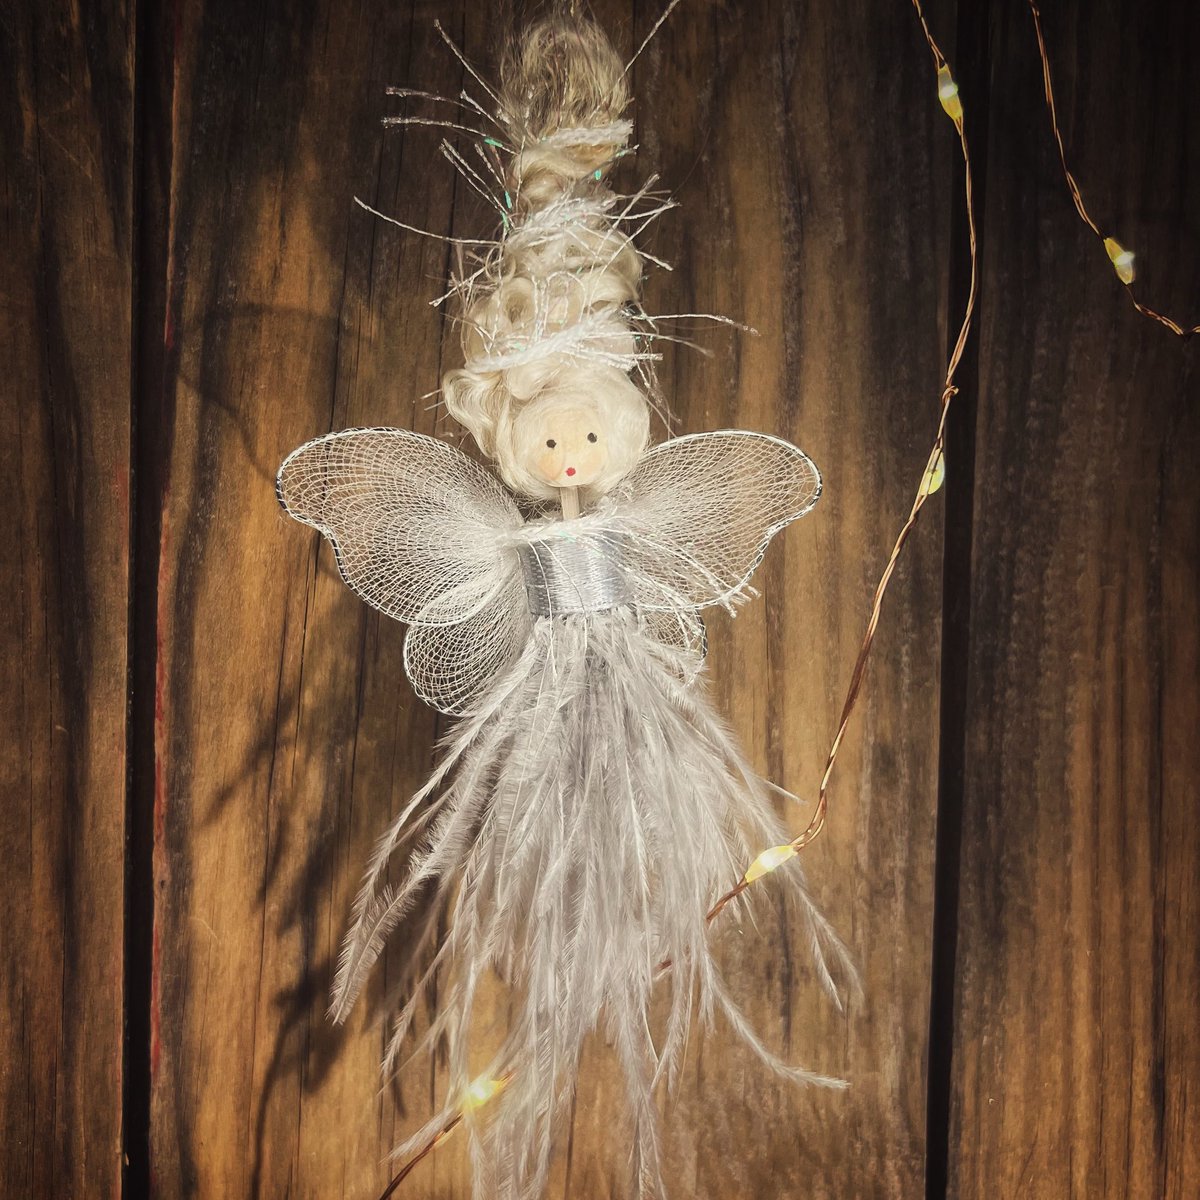 Fiver Friday - Marabou Fairies full of magic for the new month of May ✨ The month of expectation and the bridge that takes us from spring into summer, the May fairies bring the promise of wishes & hope. #EarlyBiz #MHHSBD #TheCraftersUk wildwillowfairies.co.uk